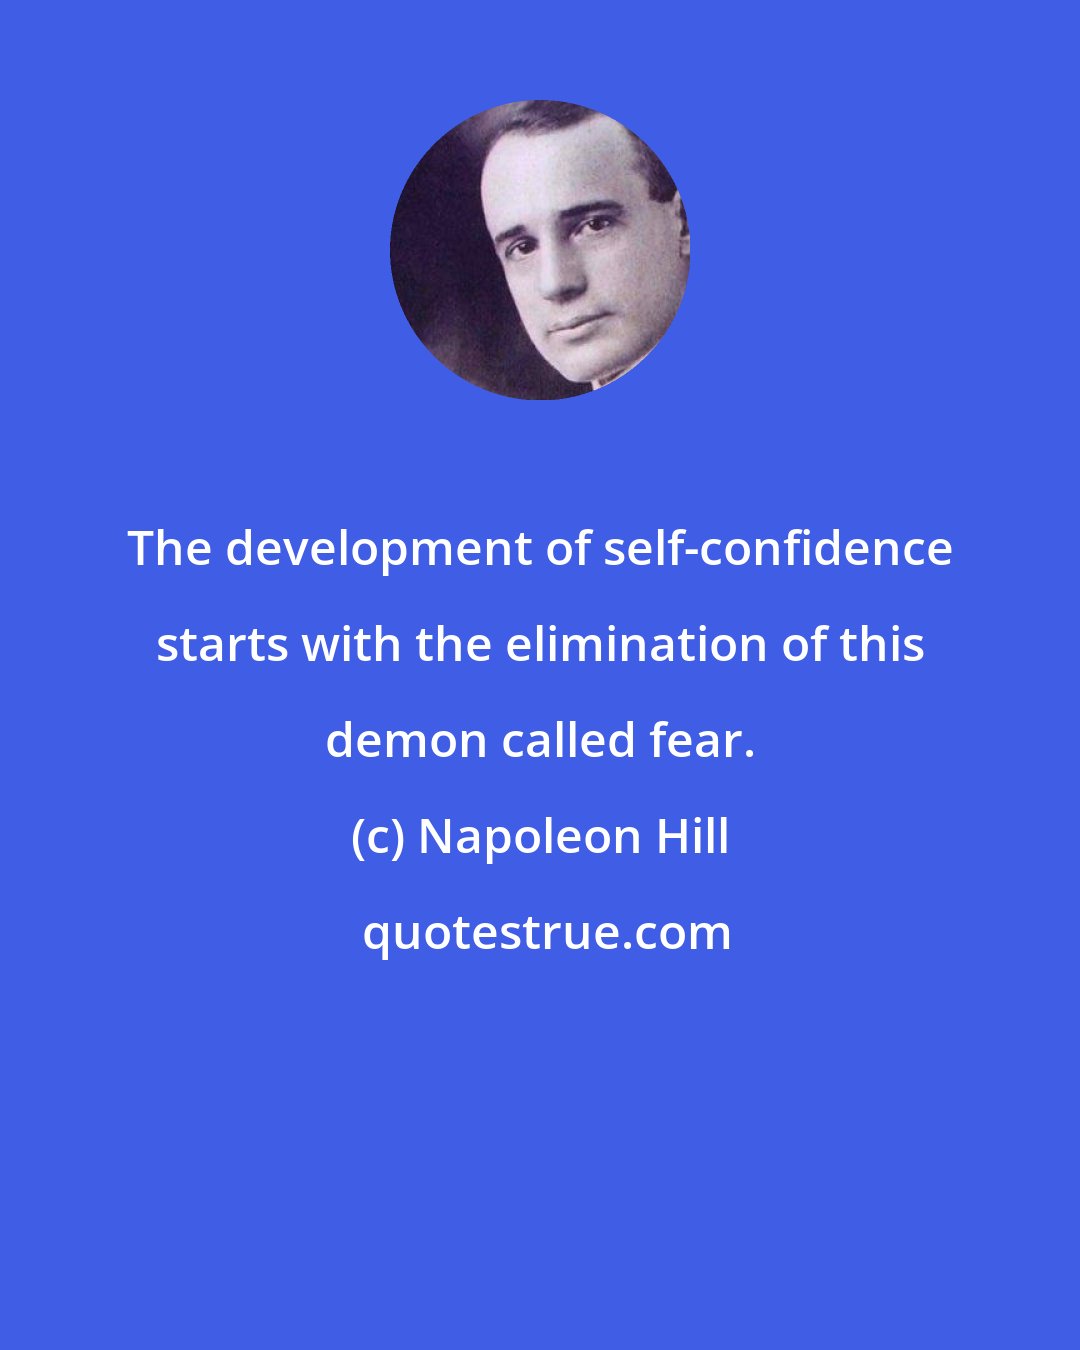 Napoleon Hill: The development of self-confidence starts with the elimination of this demon called fear.